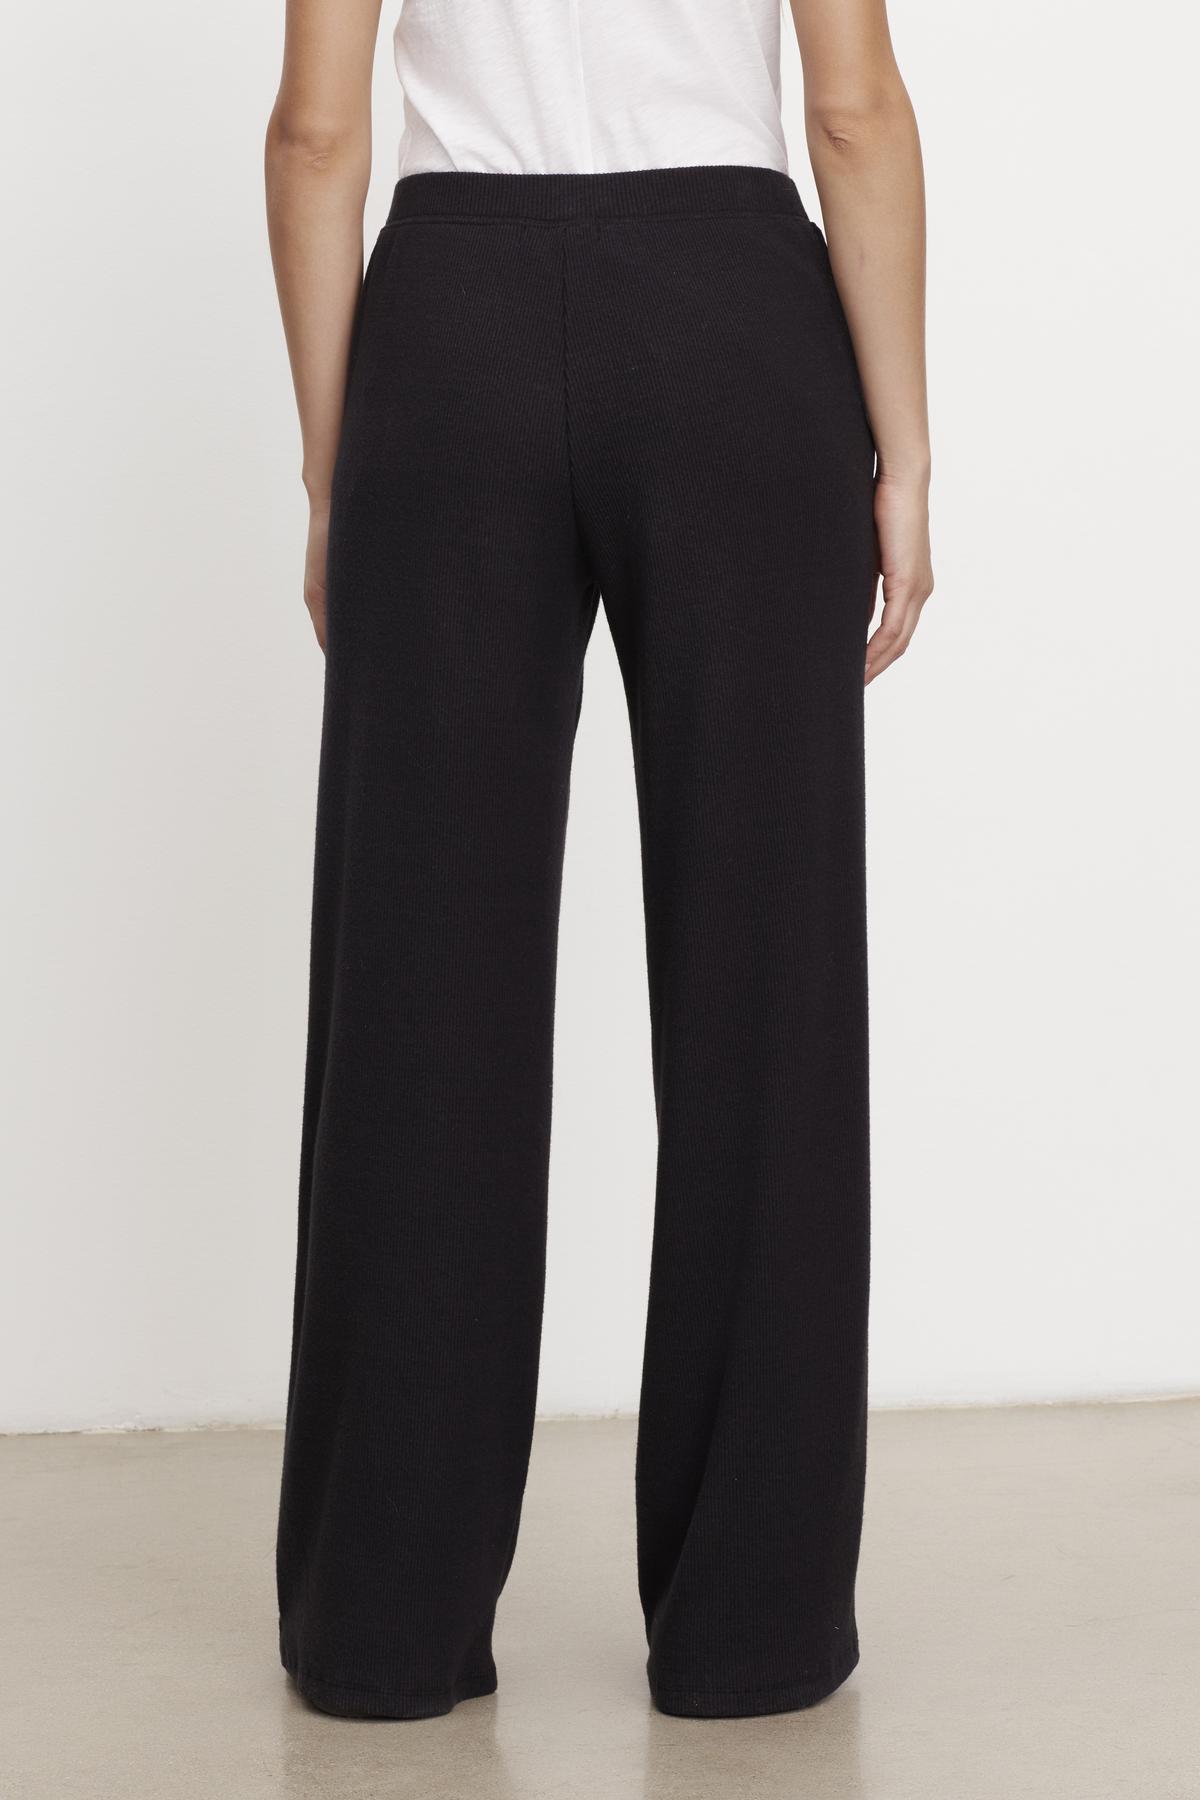 The back view of a person wearing Velvet by Graham & Spencer's KACIE BRUSHED RIB PANT.-35701975351489